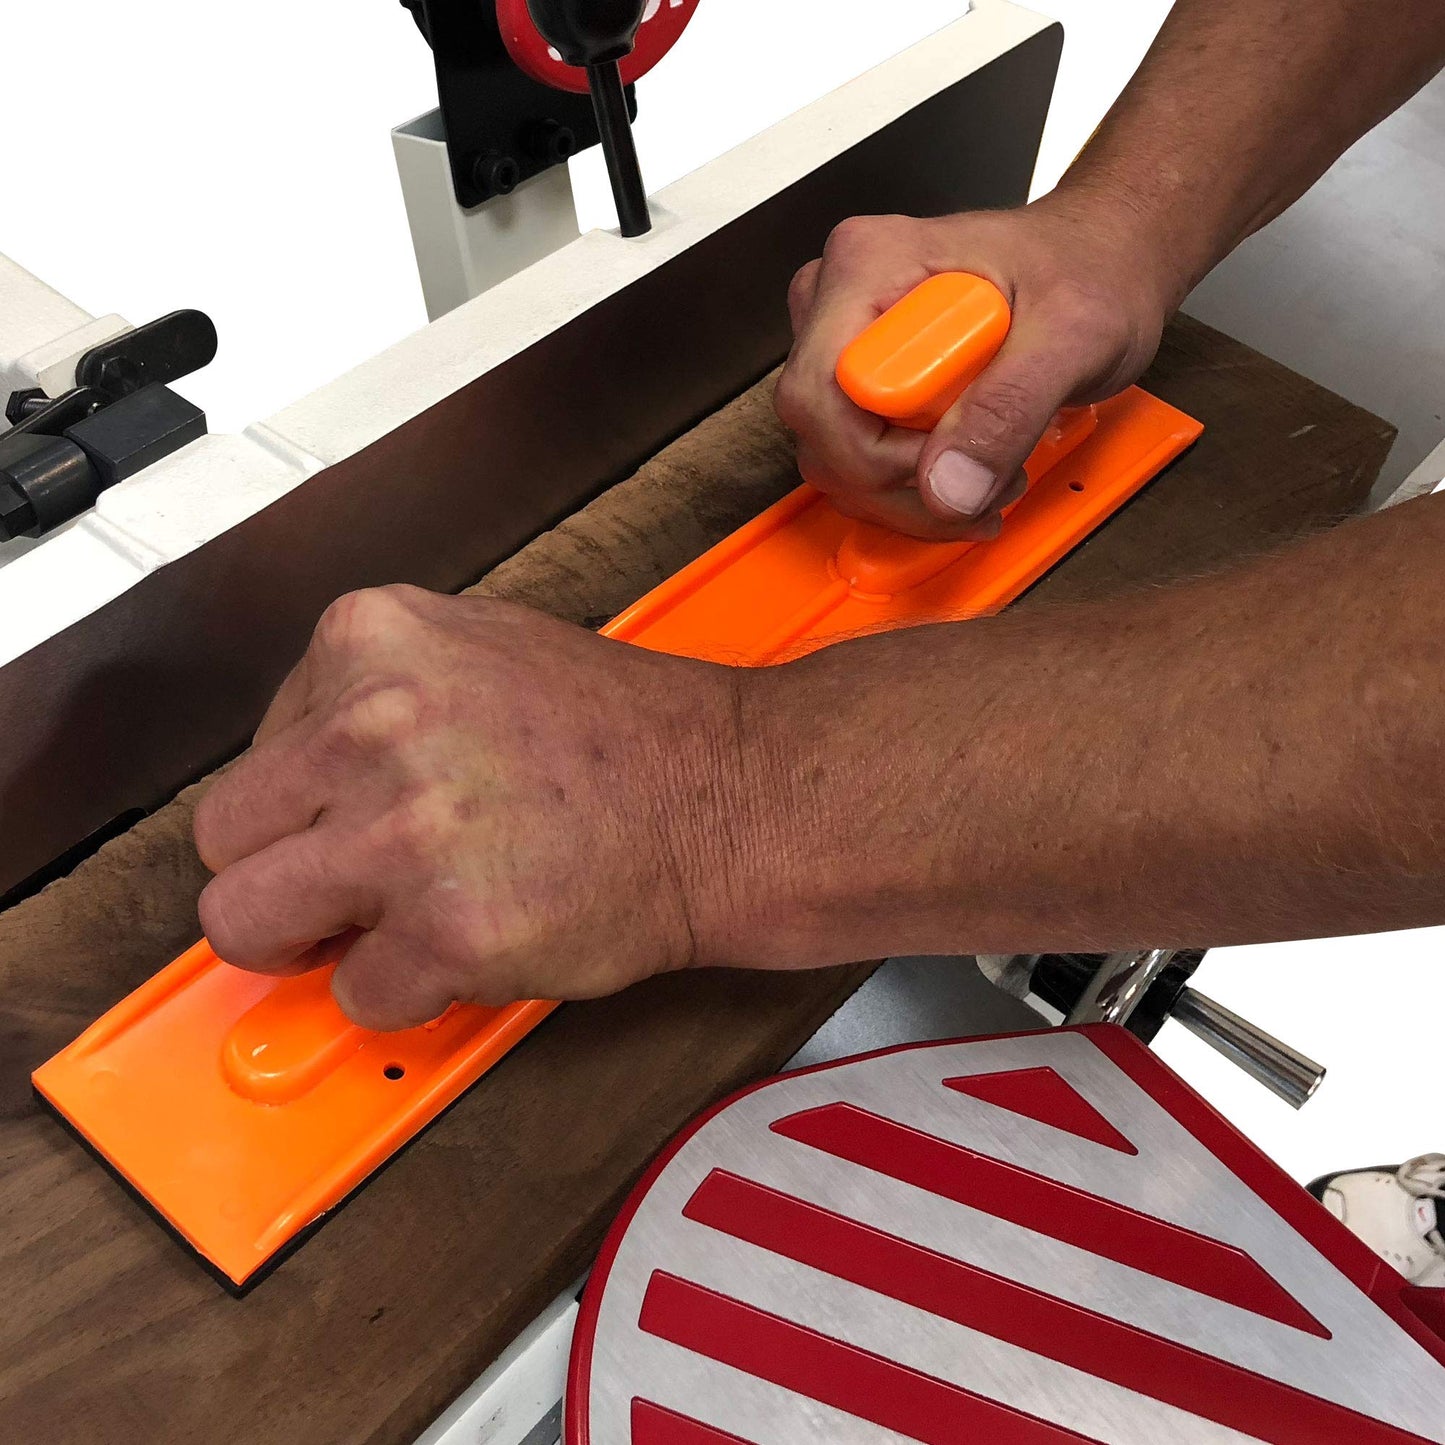 Safety Woodworking Push Block and Stick Package 5 Piece Set In Safety Orange Color, Ideal for Woodworkers and Use On Router Tables, Jointers and Band